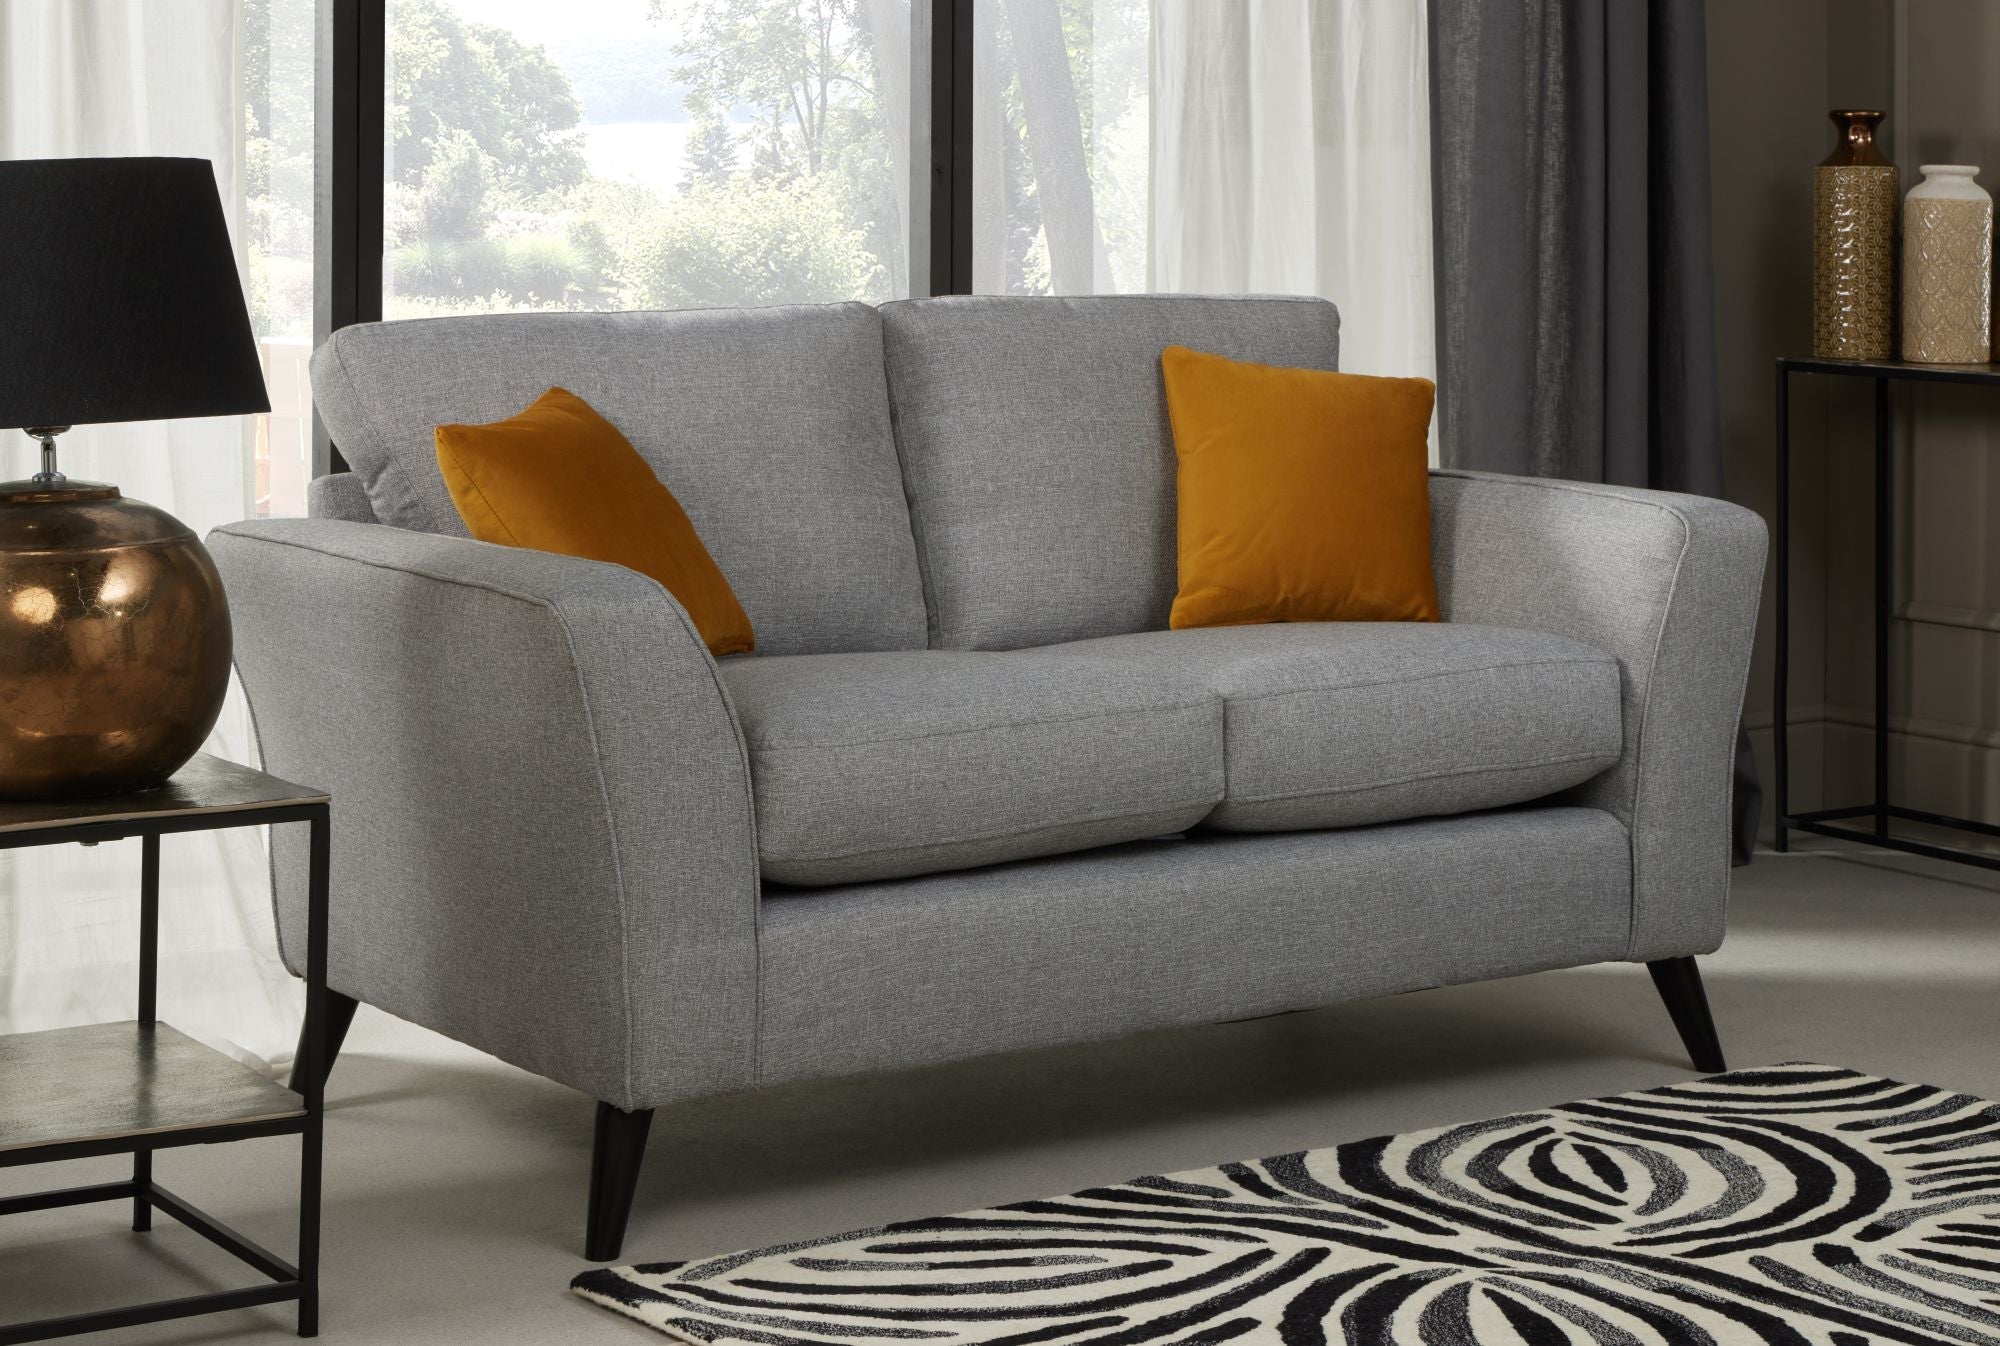 libby 2 seater sofa in silver shown in a room setting 